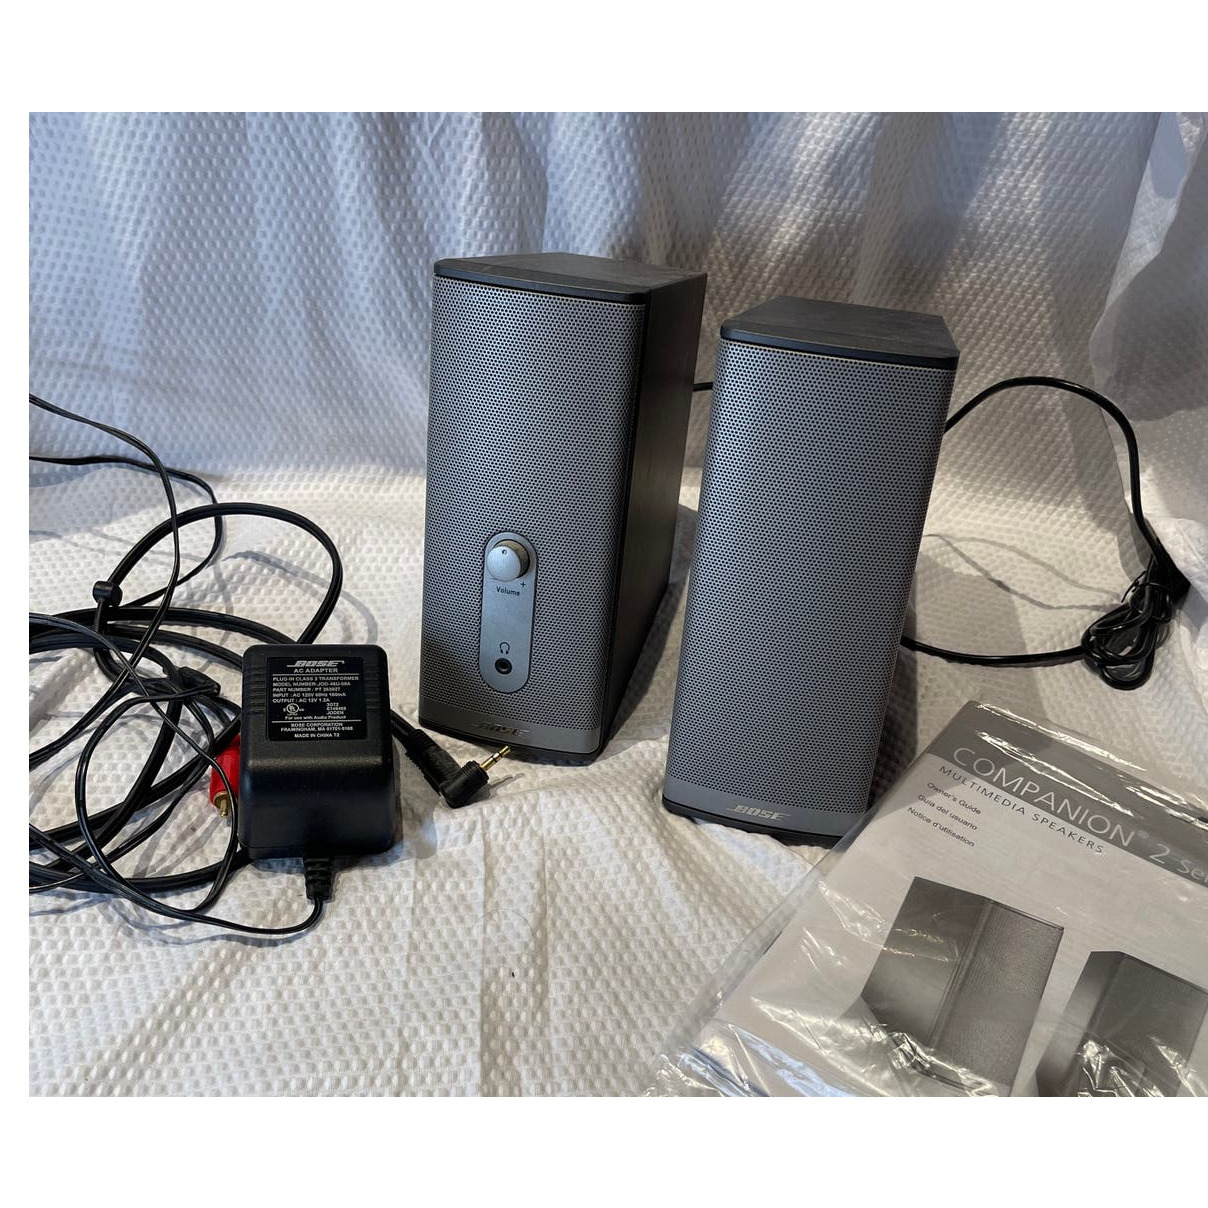 Bose Companion 2 Series II Multimedia Speakers w/Cables & Manual Tested Working